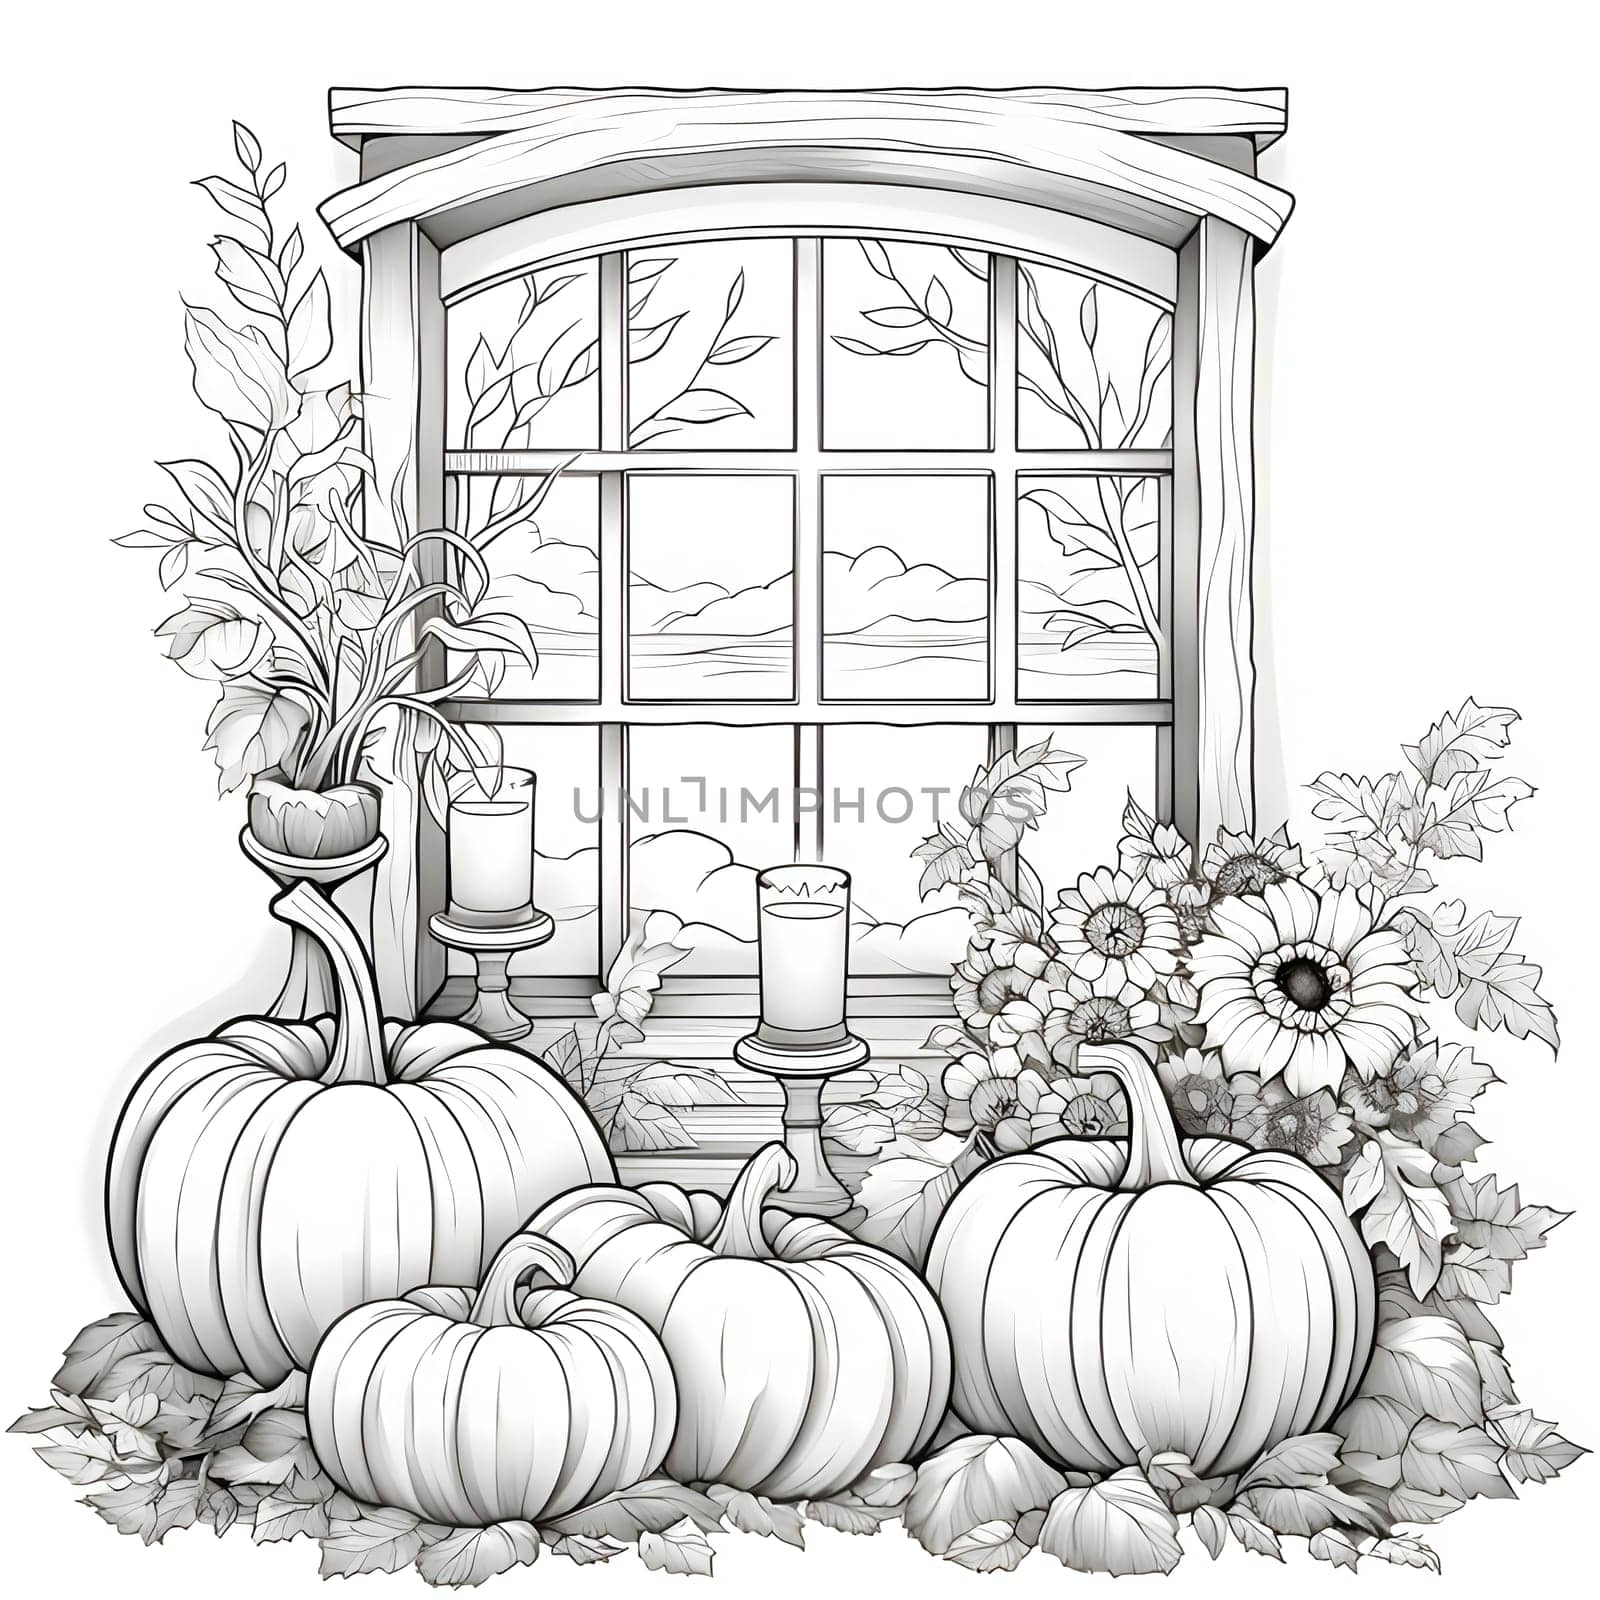 Black and White coloring book on it candles pumpkins flowers in the background window. Pumpkin as a dish of thanksgiving for the harvest, picture on a white isolated background. by ThemesS